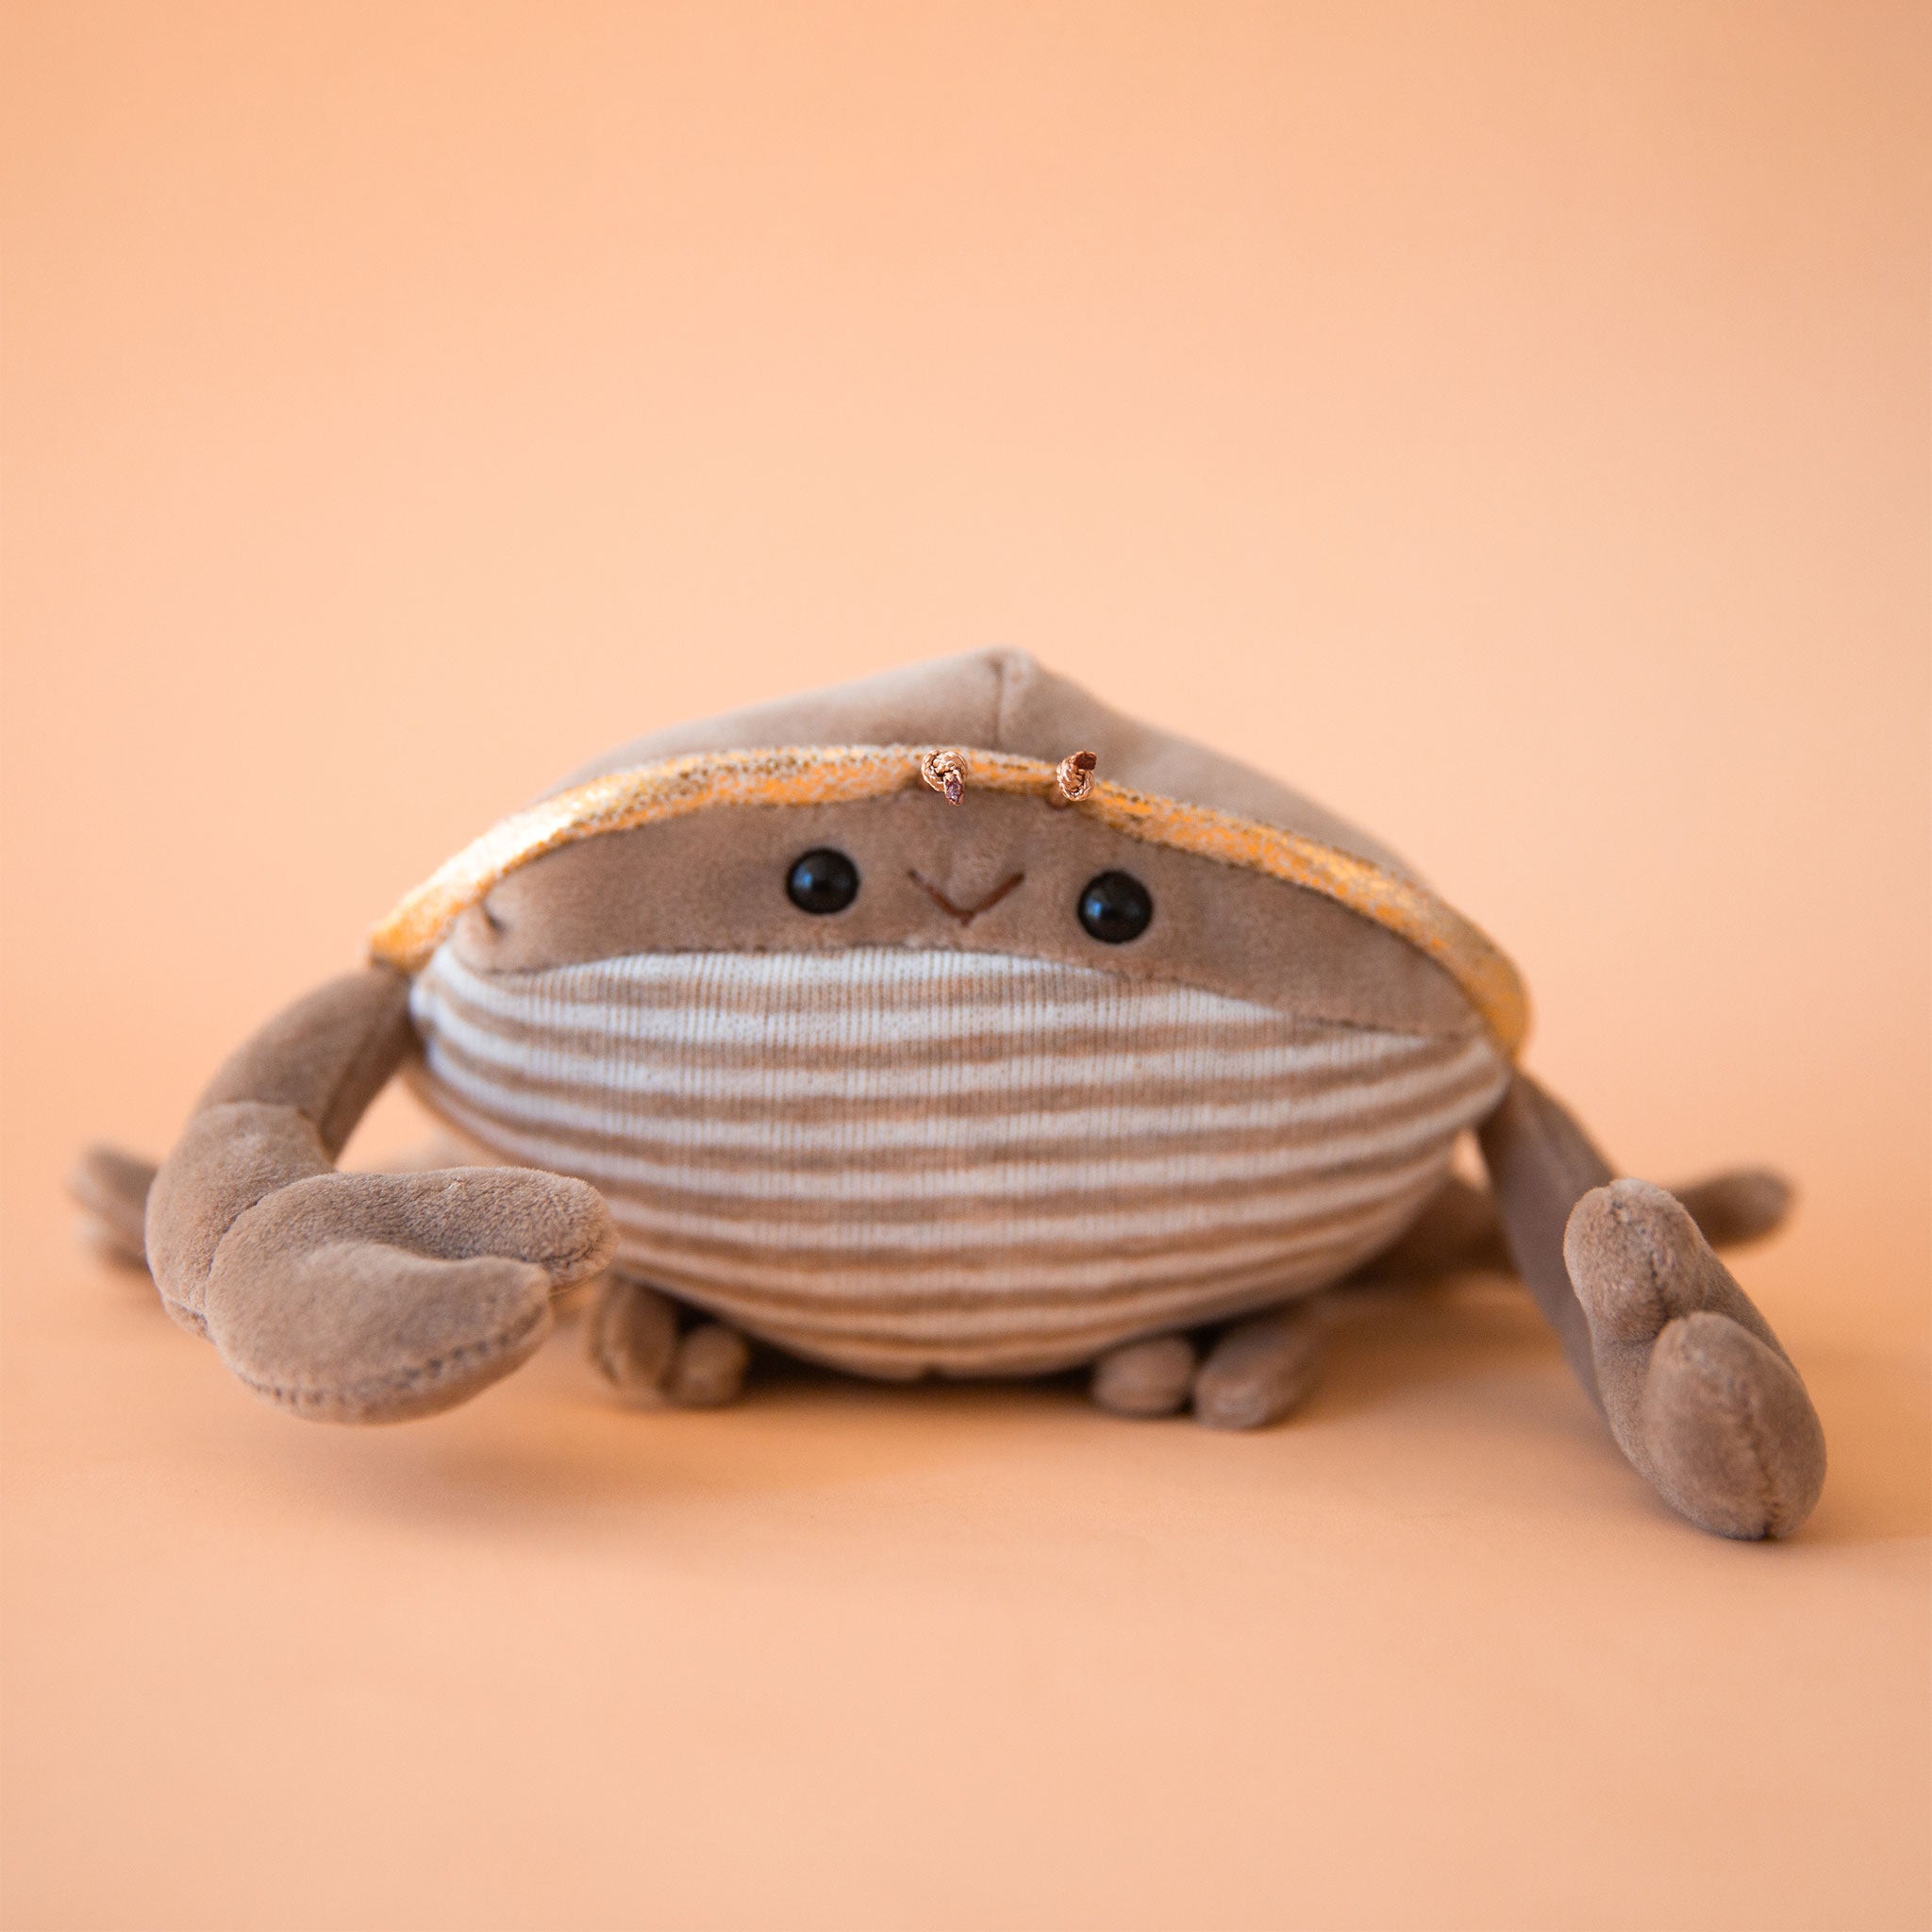 On a tan background is a grey ish brown crab stuffed toy with a sweet smiling face.